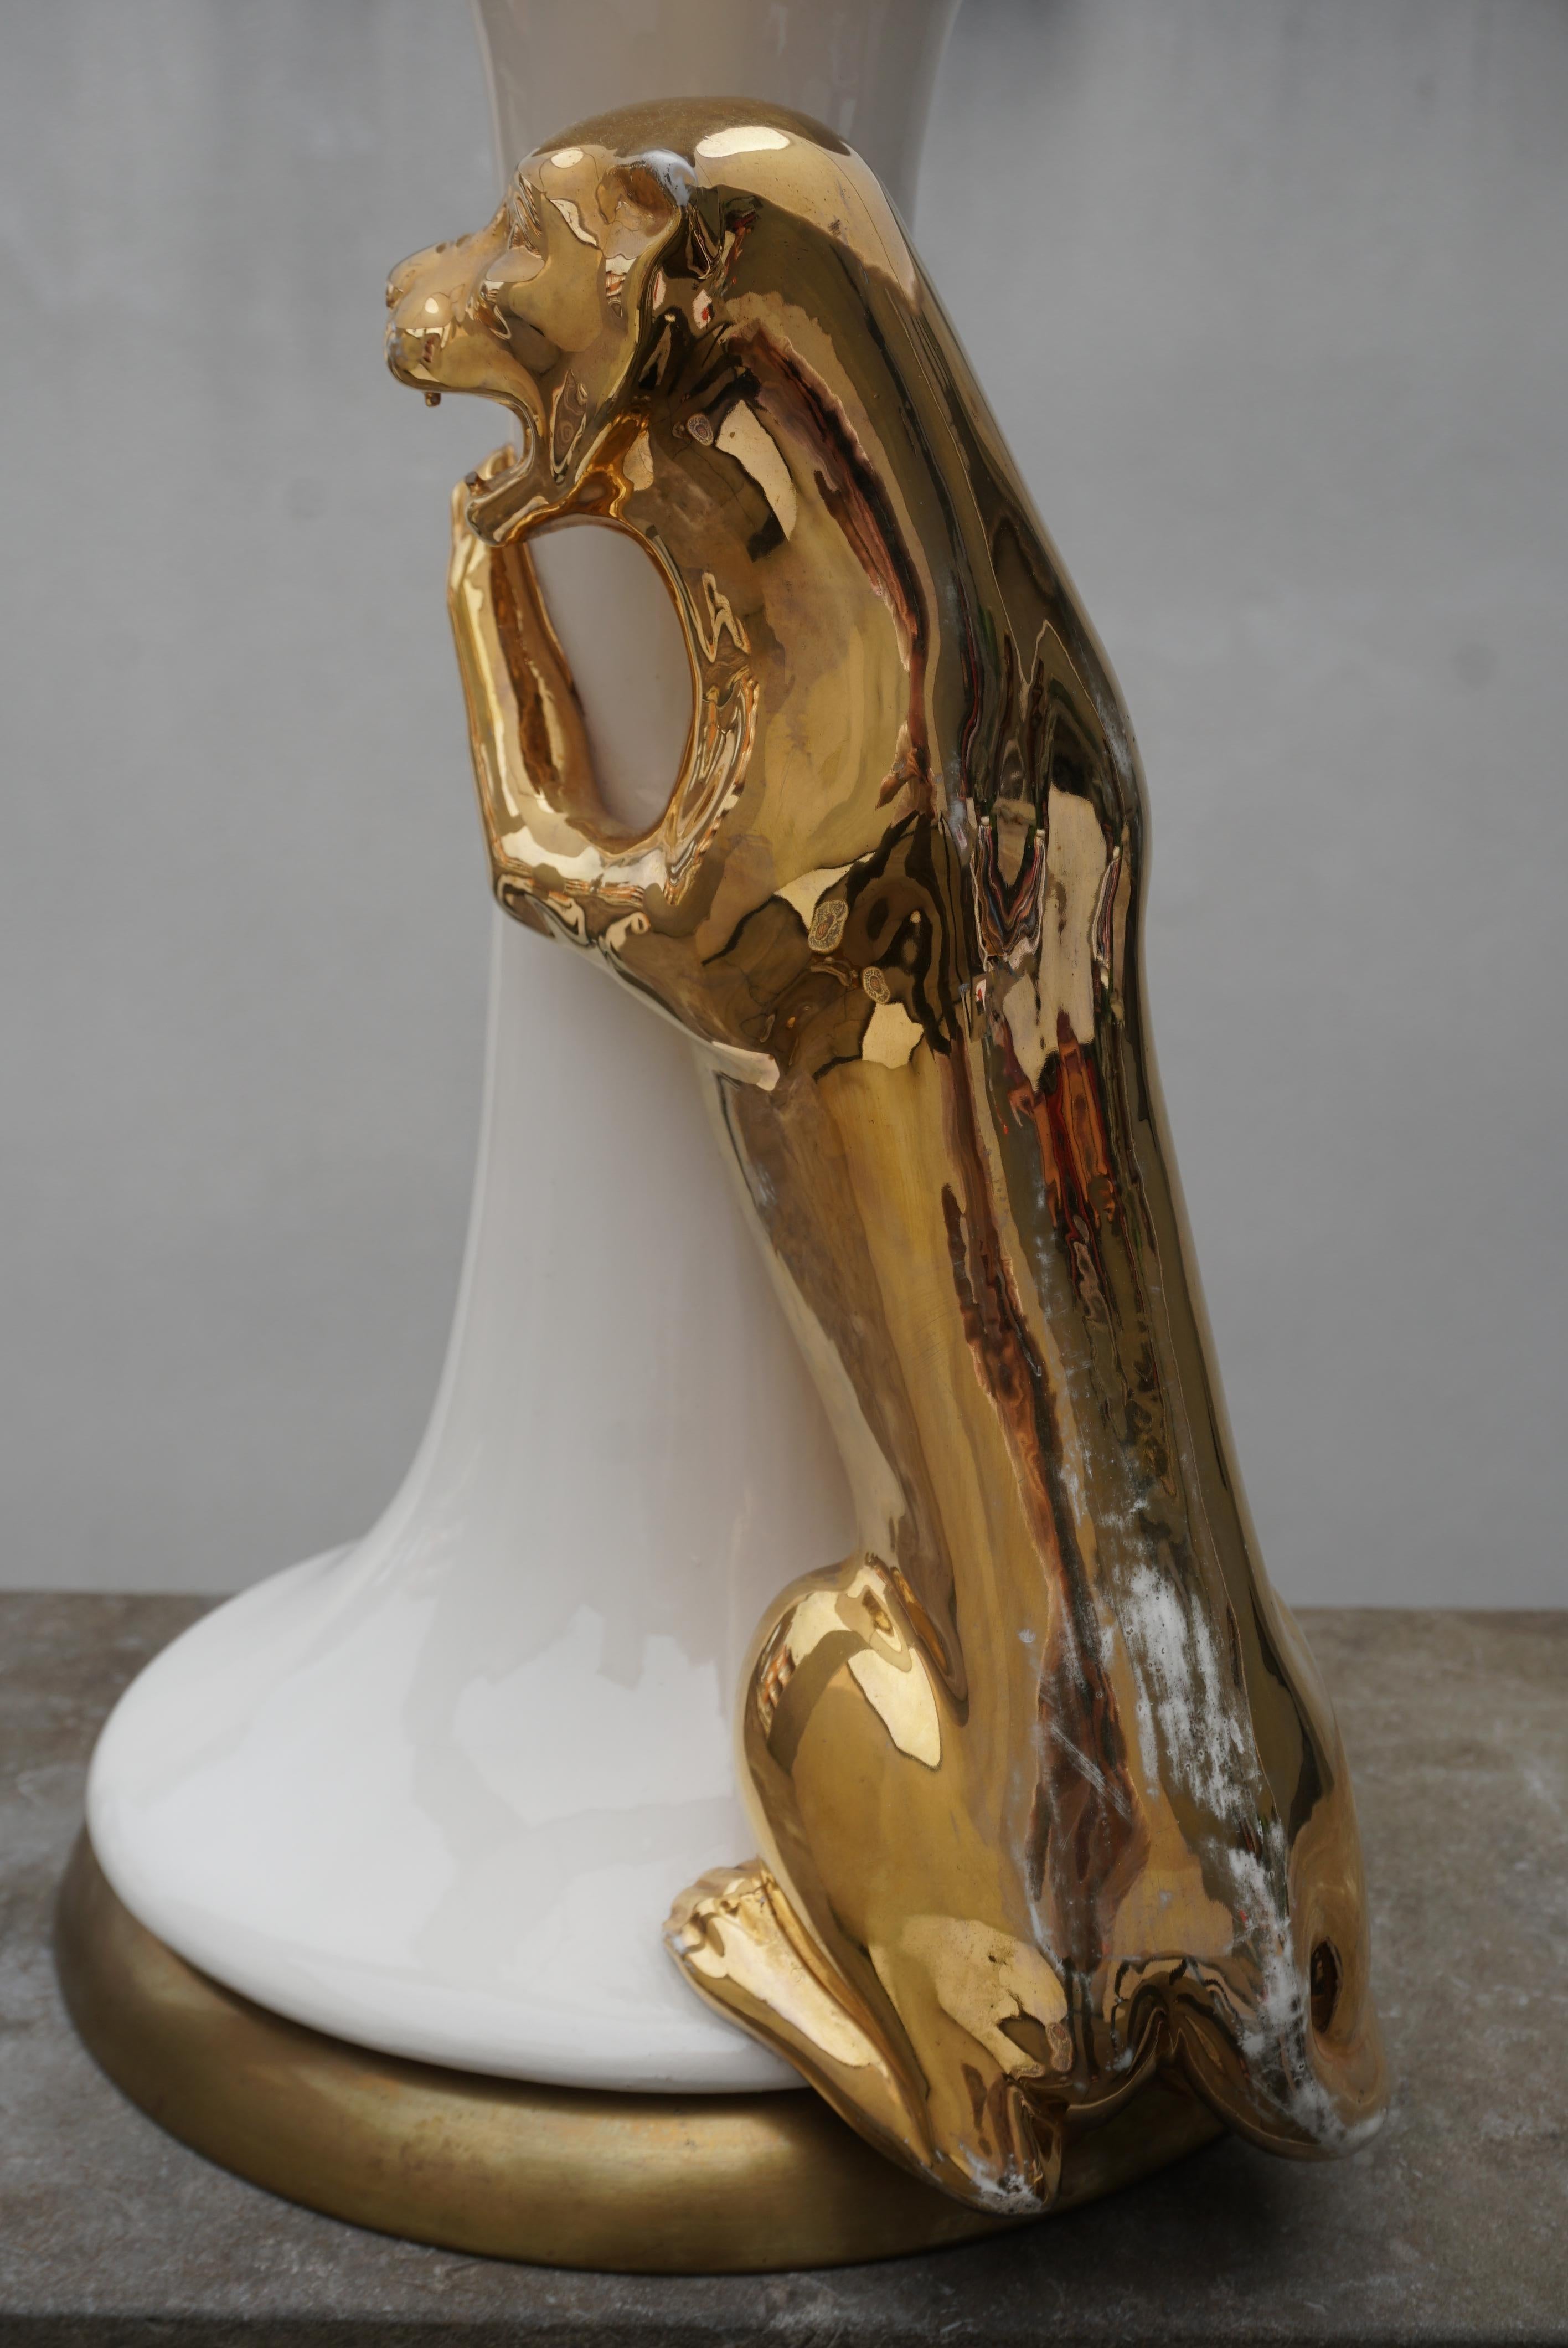 Italian Midcentury Table Lamp with Ceramic Gilt Panther, 1970s For Sale 3